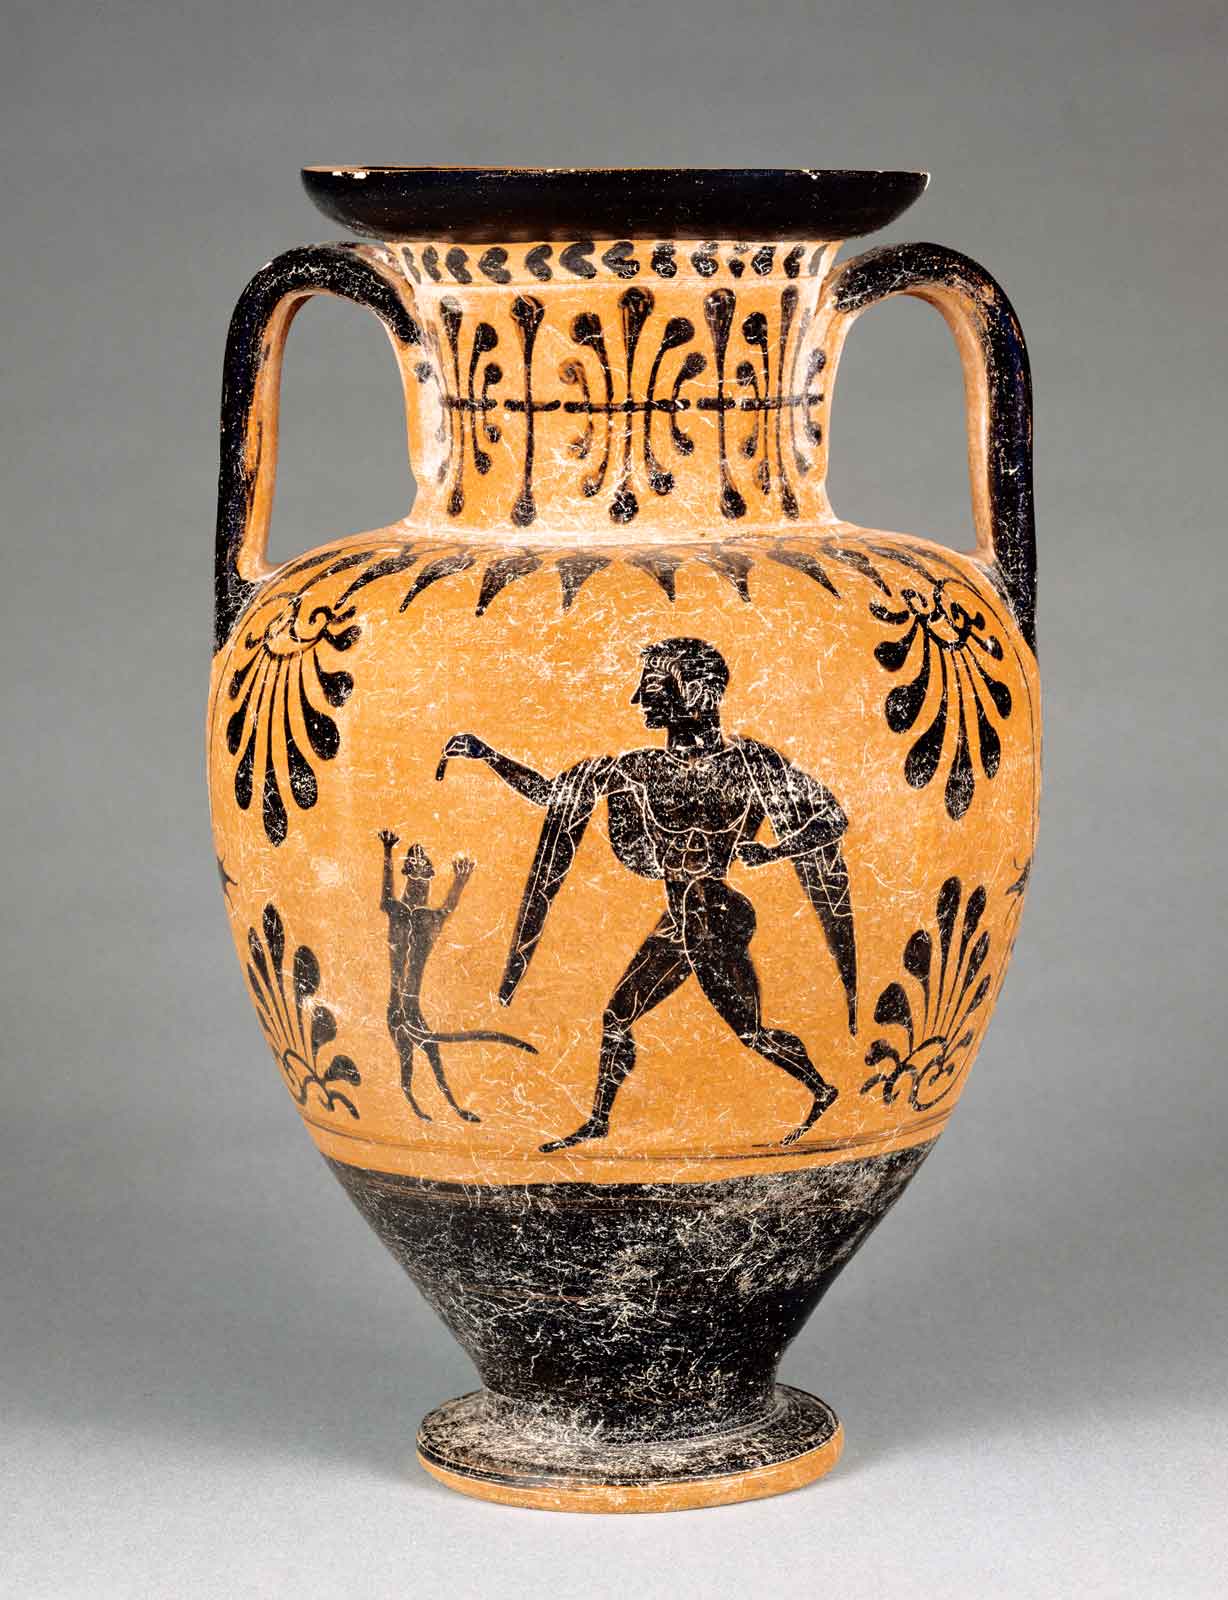 Neck-Amphora by the Painter of the Dancing Satyrs